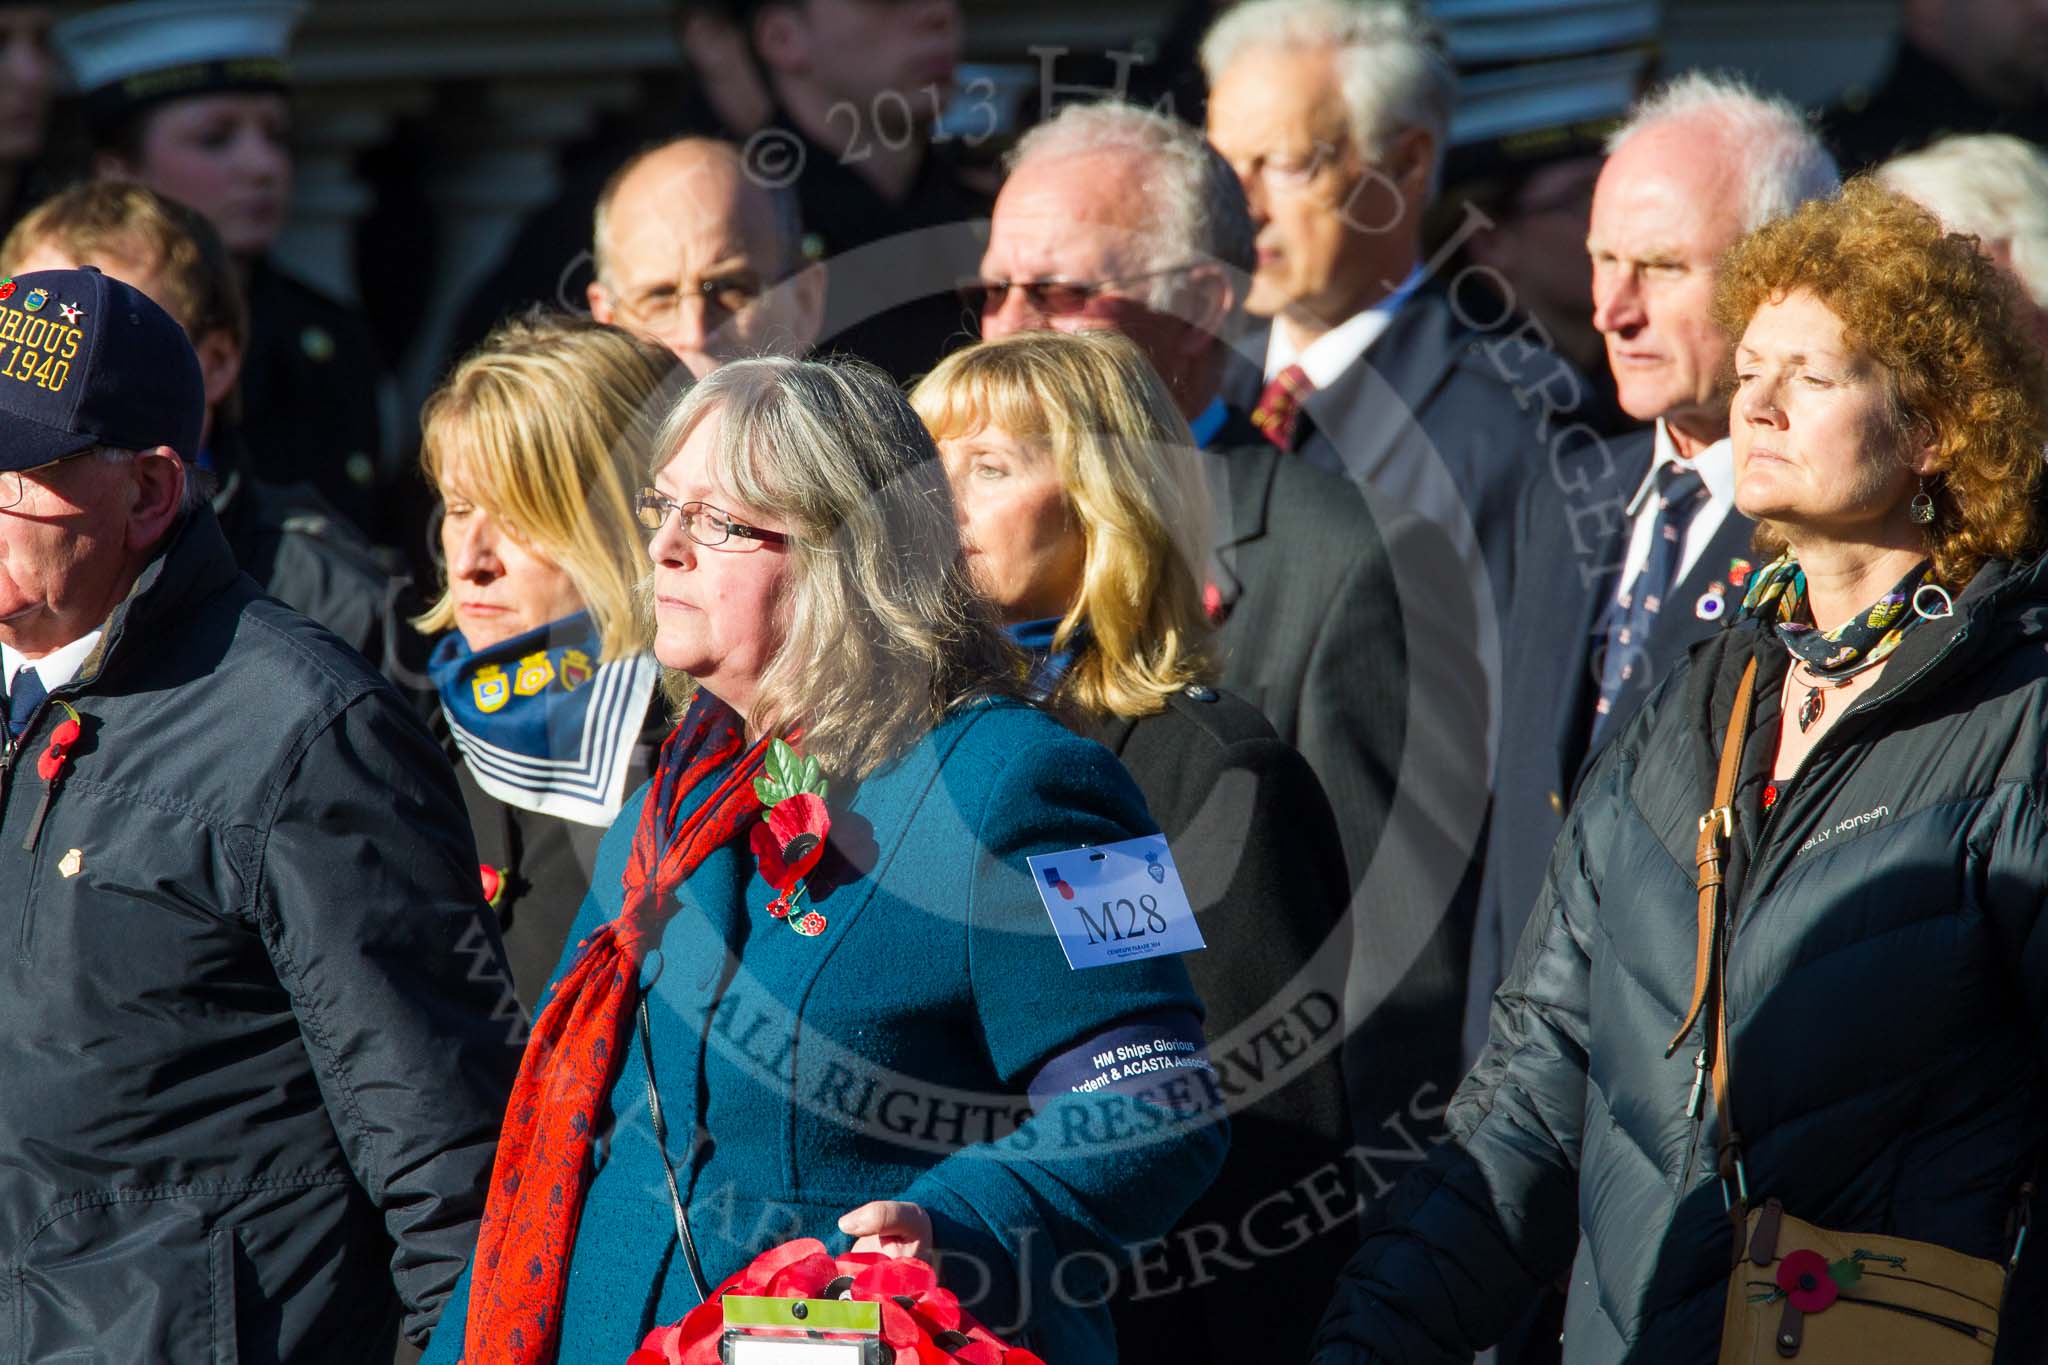 Remembrance Sunday at the Cenotaph in London 2014: Group M28 - HM Ships Glorious Ardent & ACASTA Association.
Press stand opposite the Foreign Office building, Whitehall, London SW1,
London,
Greater London,
United Kingdom,
on 09 November 2014 at 12:18, image #2215